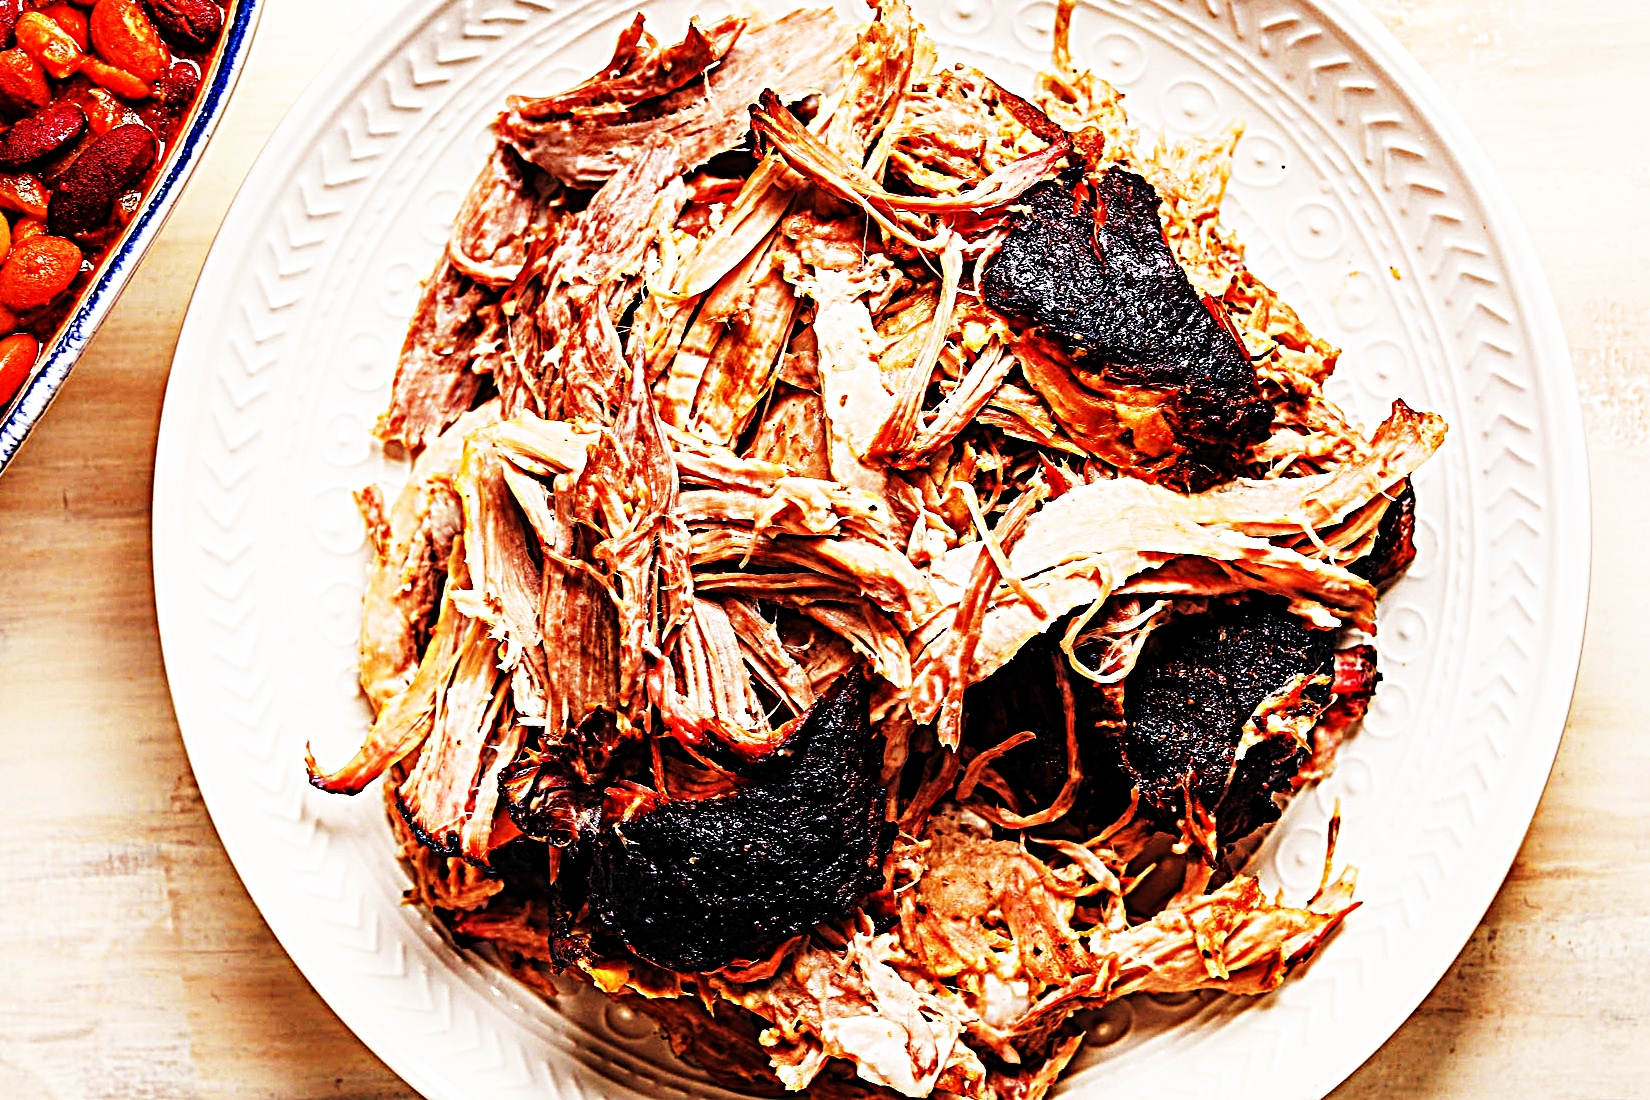 Stupid-Easy Recipe for Texas-style Salt and Pepper Pulled Pork (#1 Top-Rated)